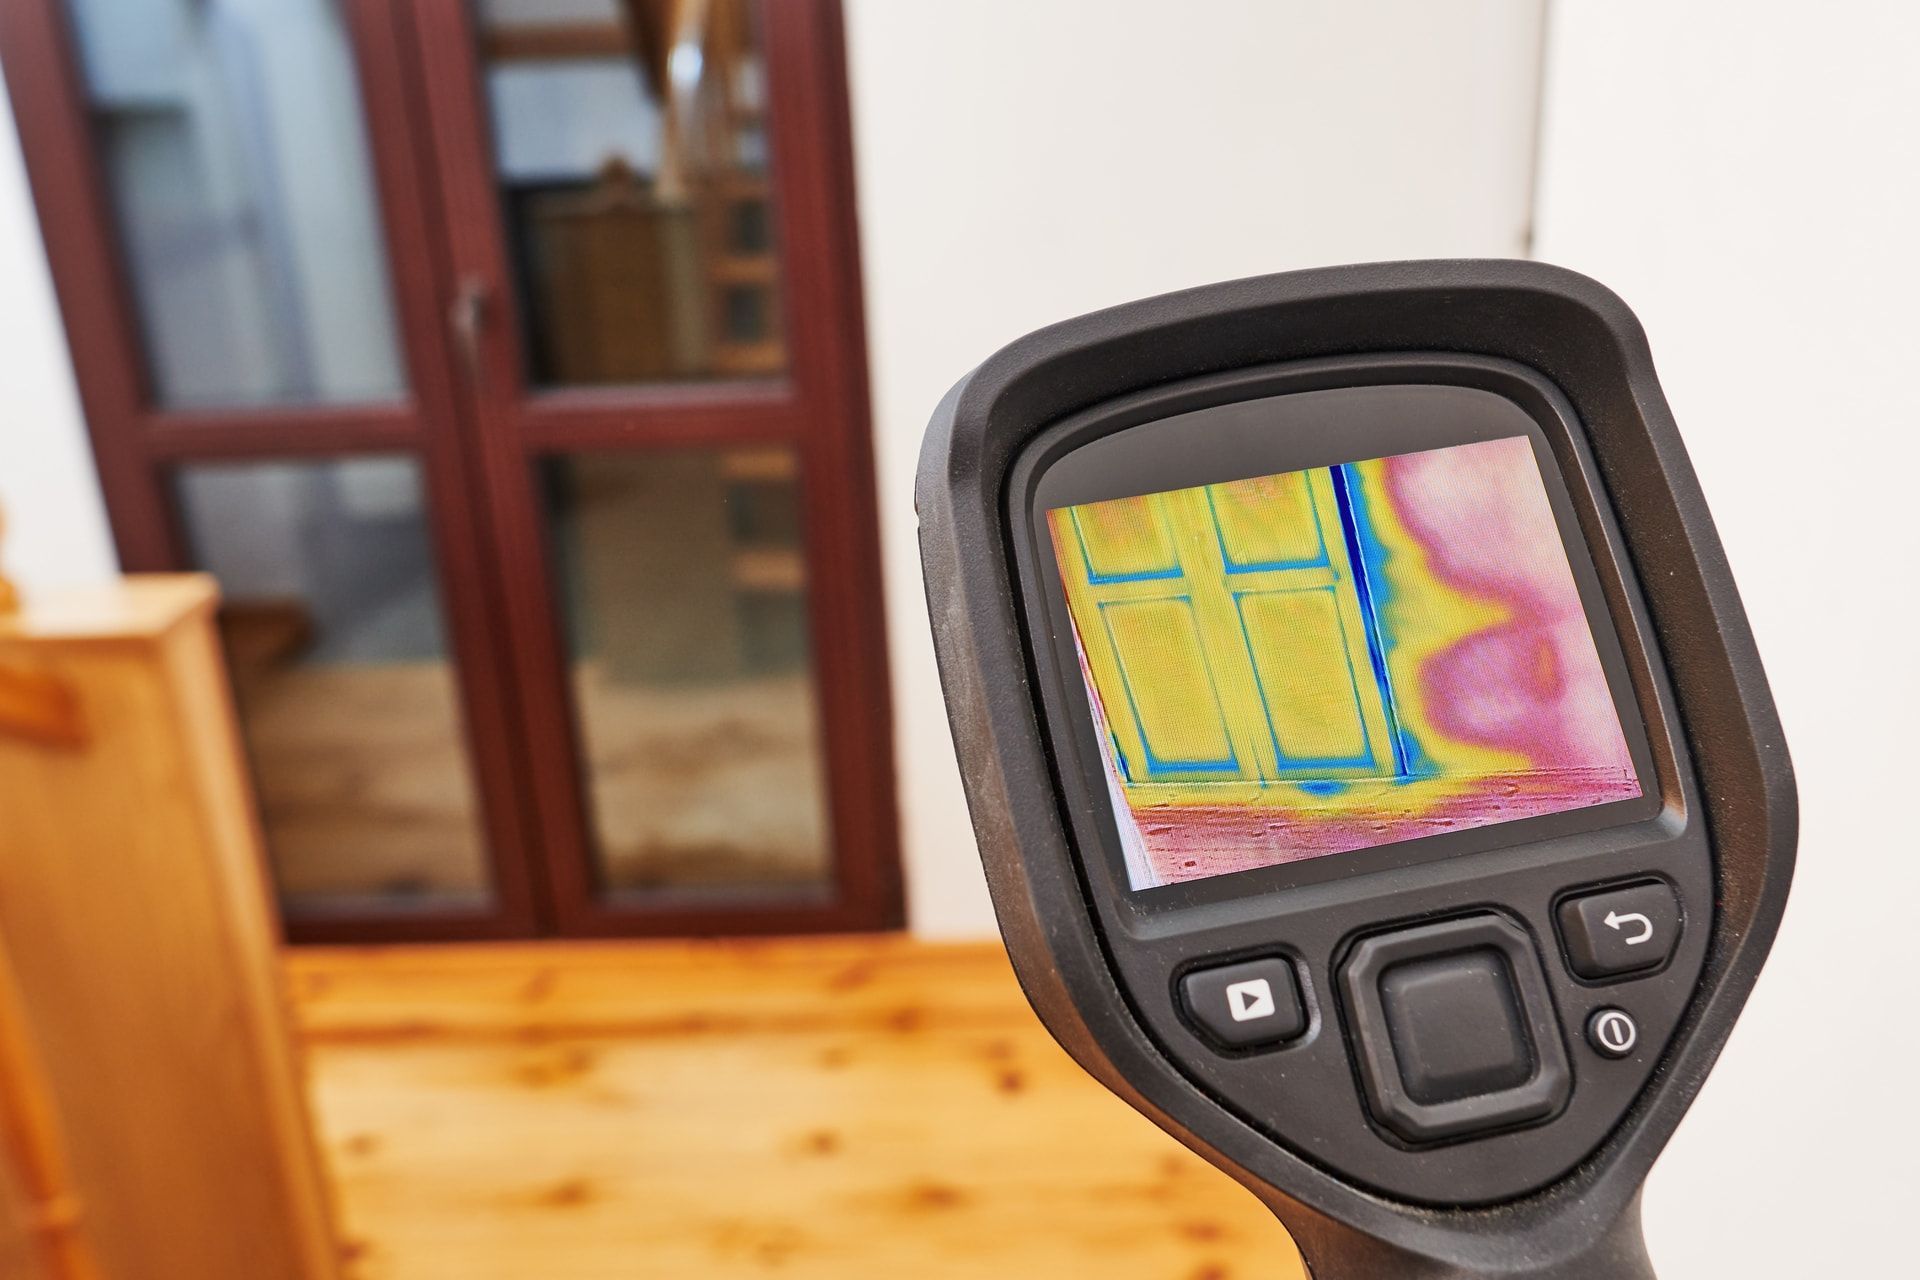 Thermography in Home Inspections: Use of Thermal Imaging- Protec